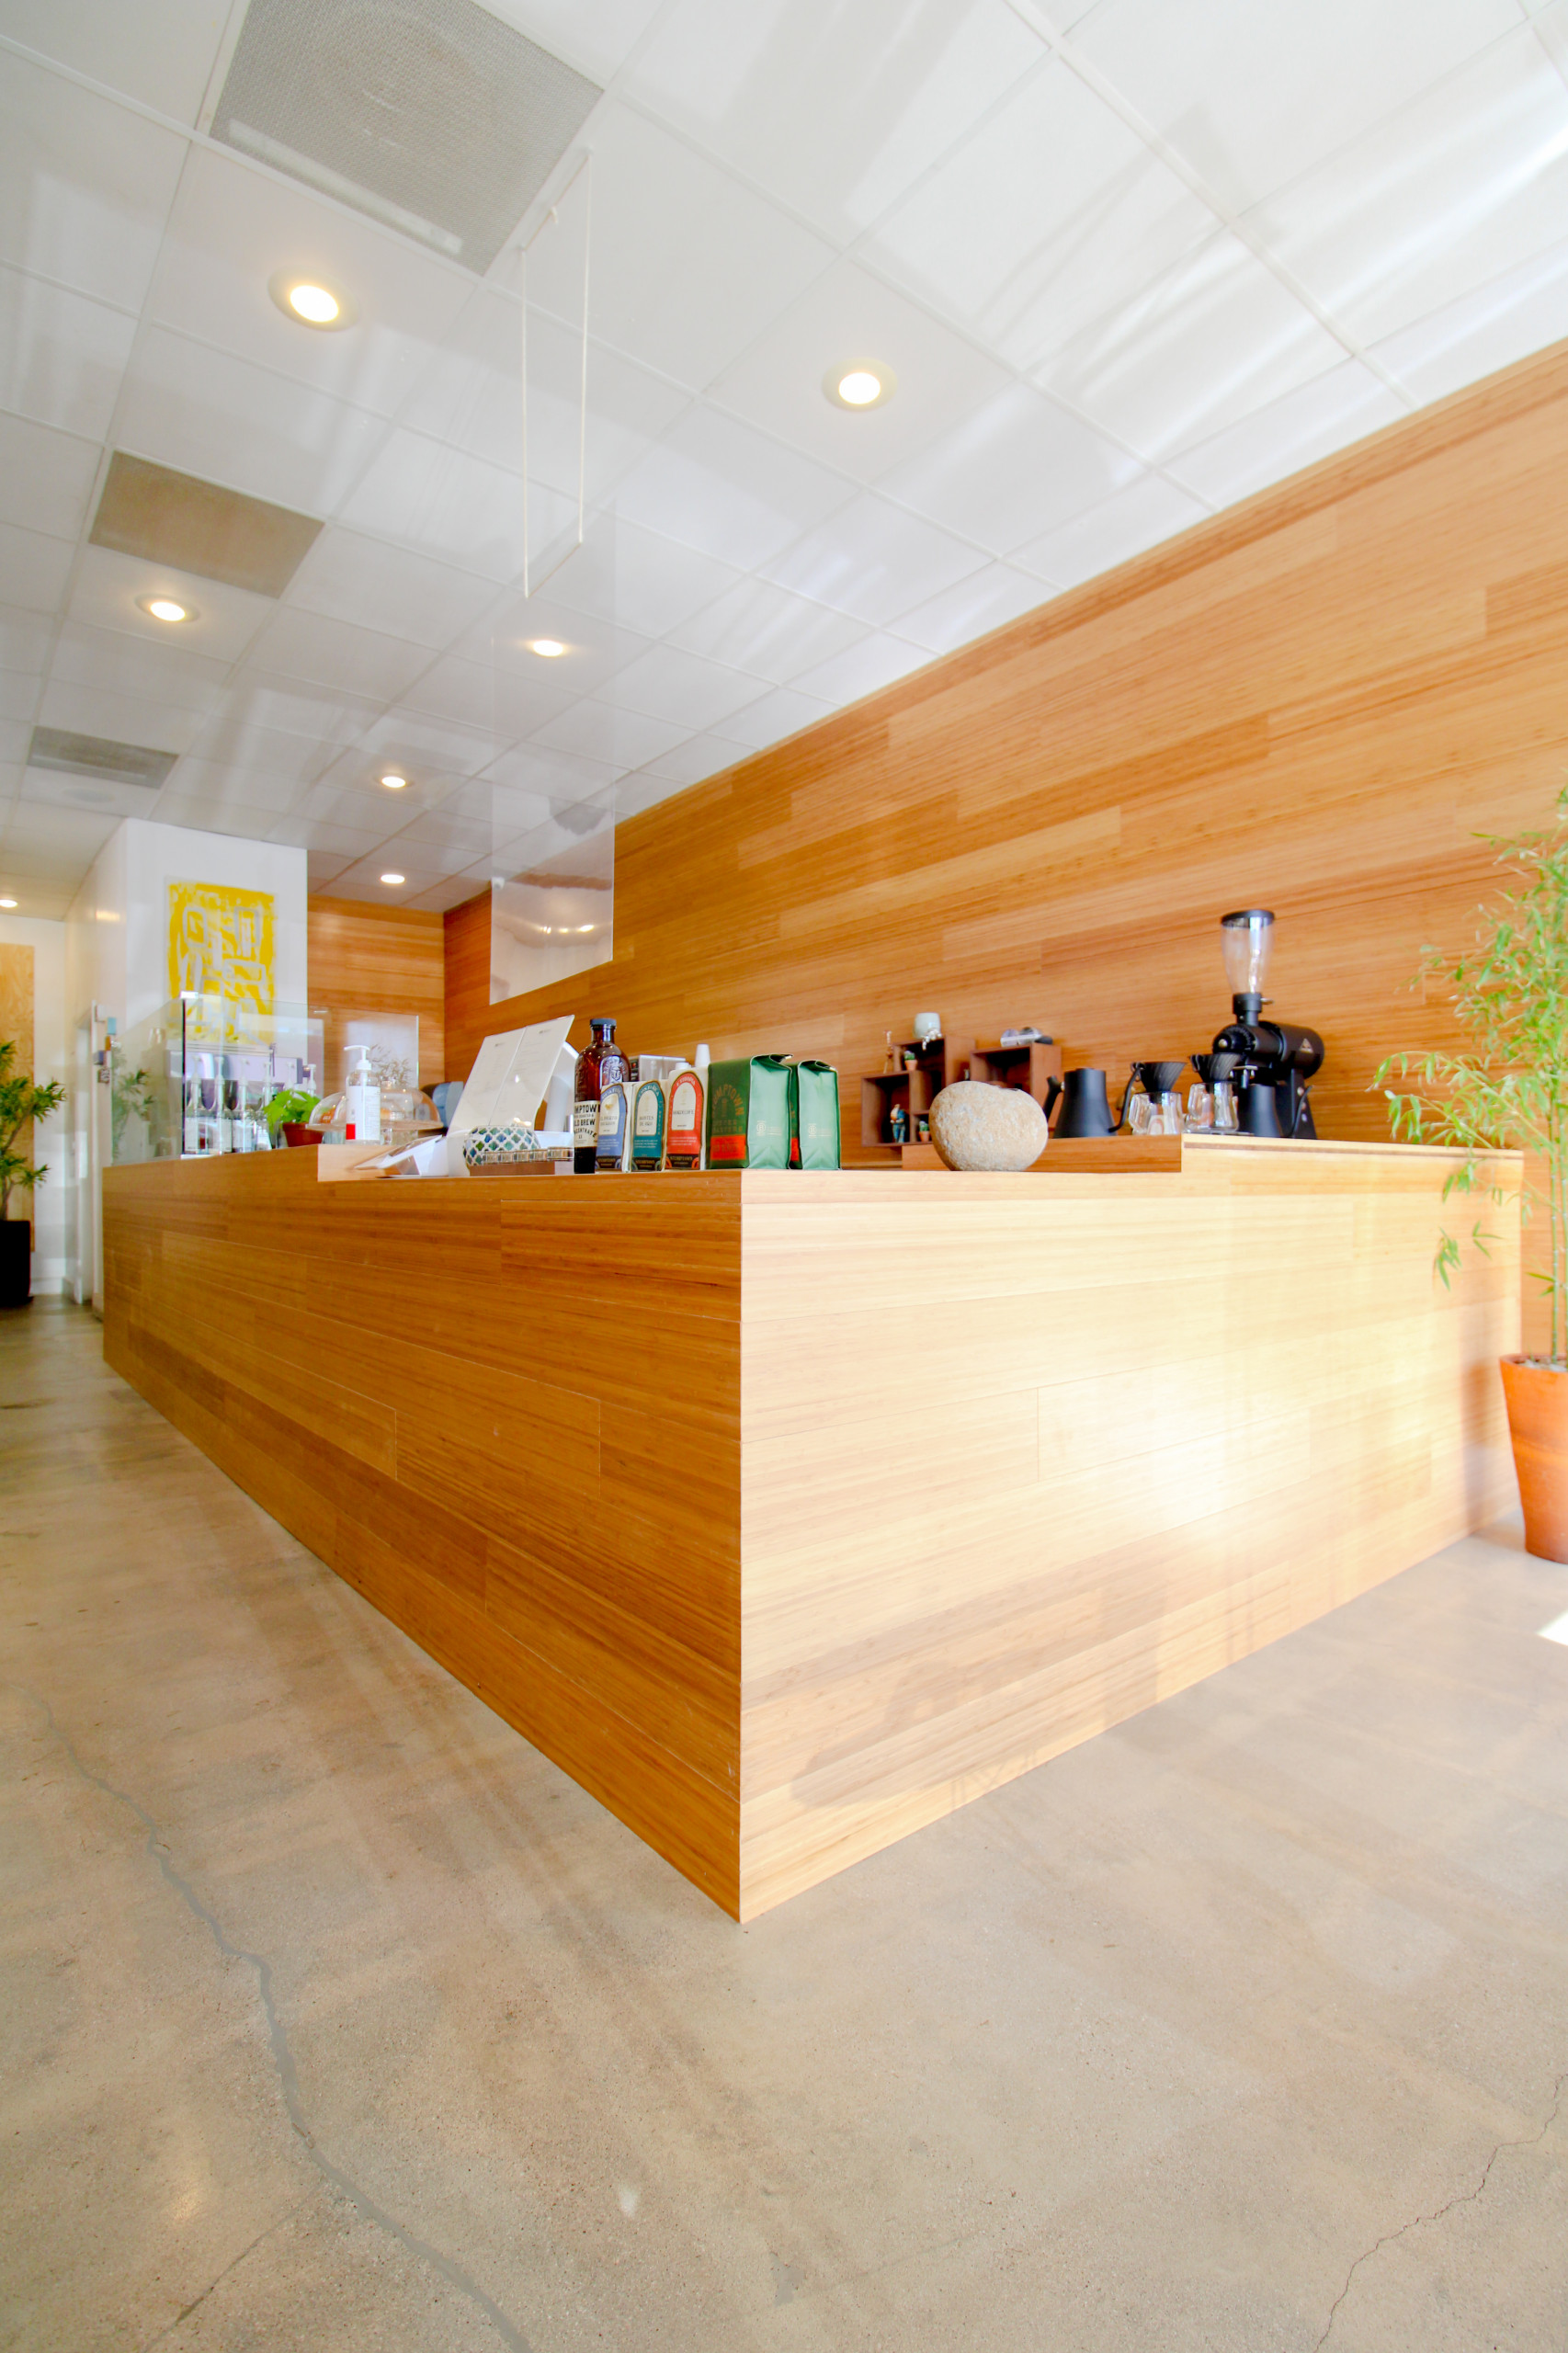 Bamboo Paneled Wall & Counter Area, Cement Flooring